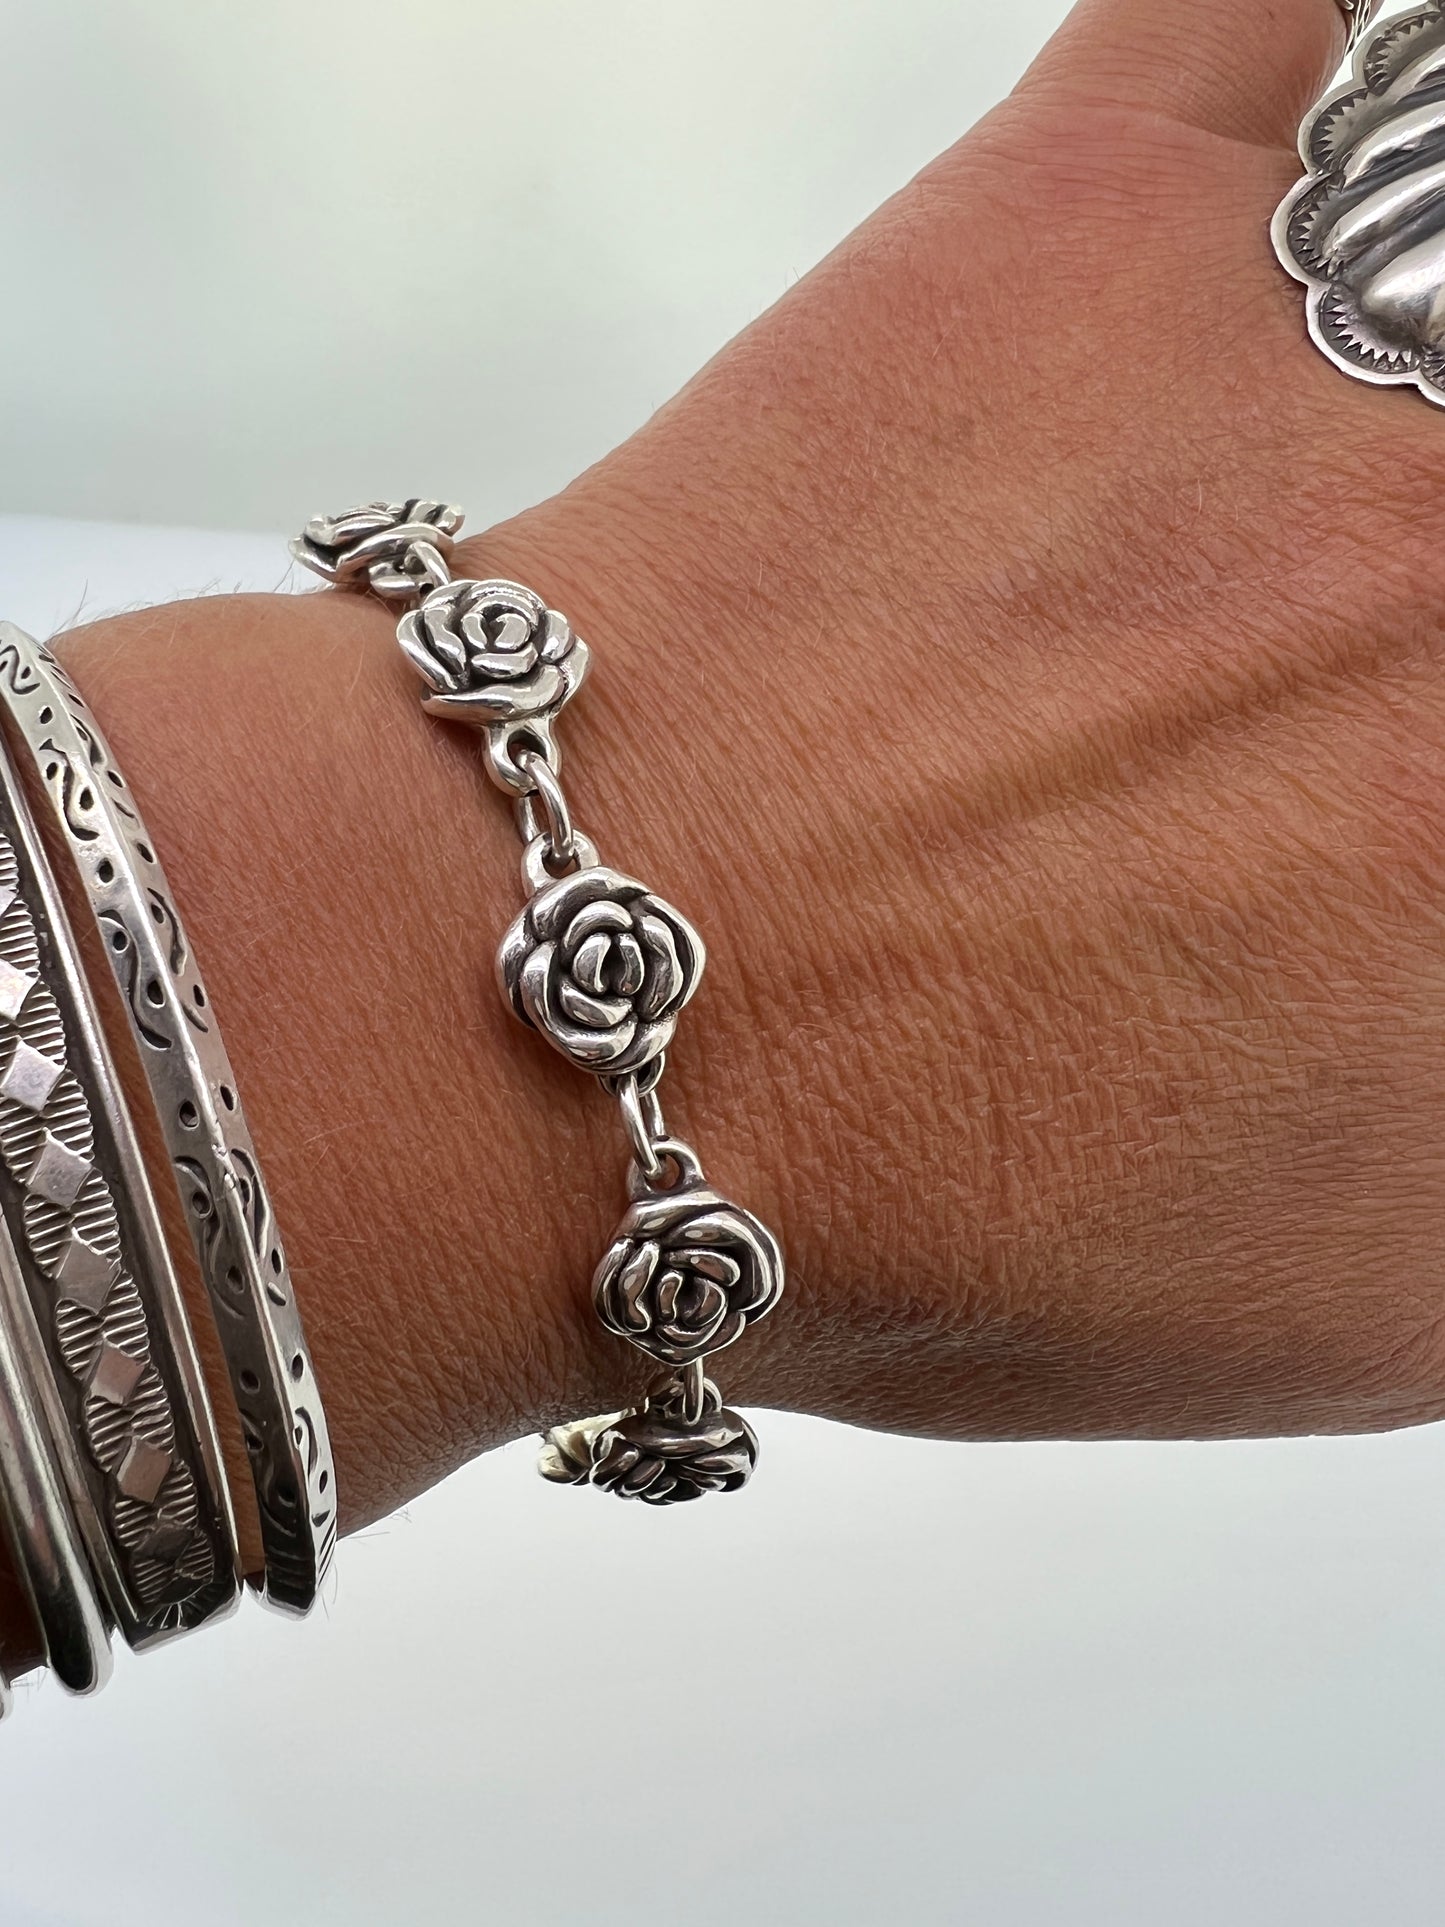 
                  
                    A wrist adorned with three silver bracelets, including a Chic Link Rose Bracelet with vintage vibes and another with intricate patterns. The thumb is partially visible wearing a large, detailed .925 sterling silver ring.
                  
                